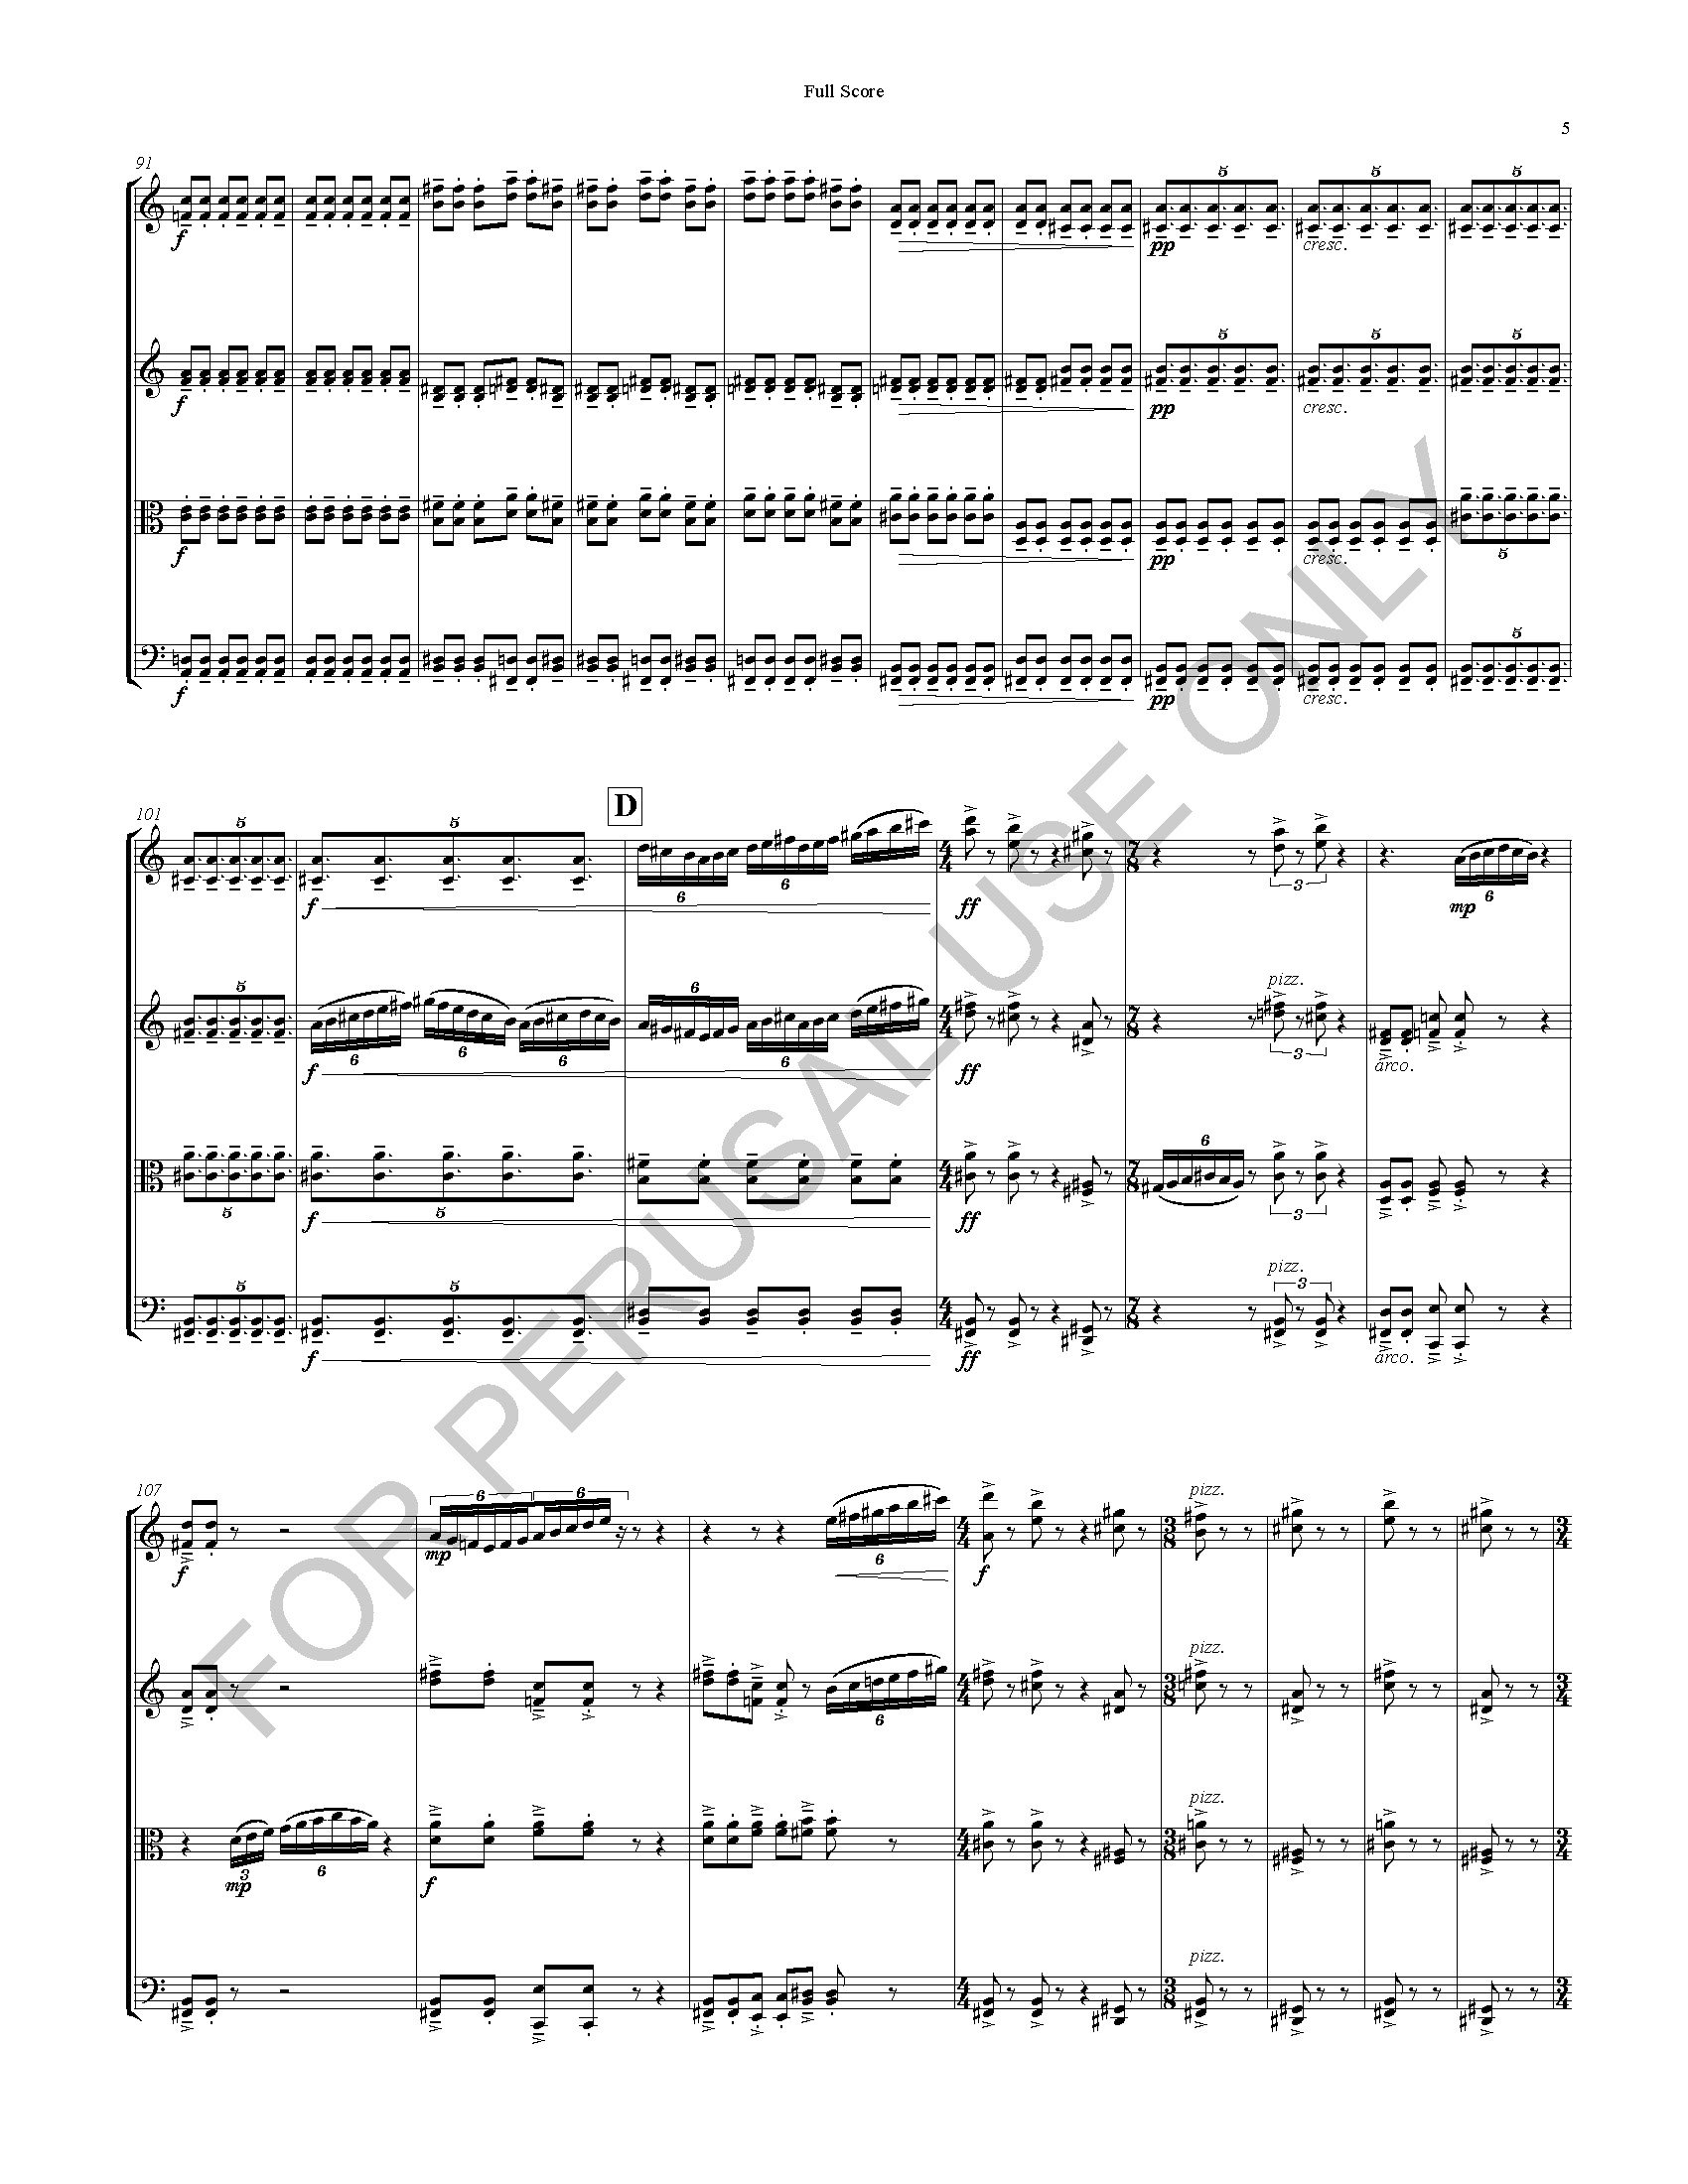 REFERENCE Smear Music (Full Score)_Page_05.jpg